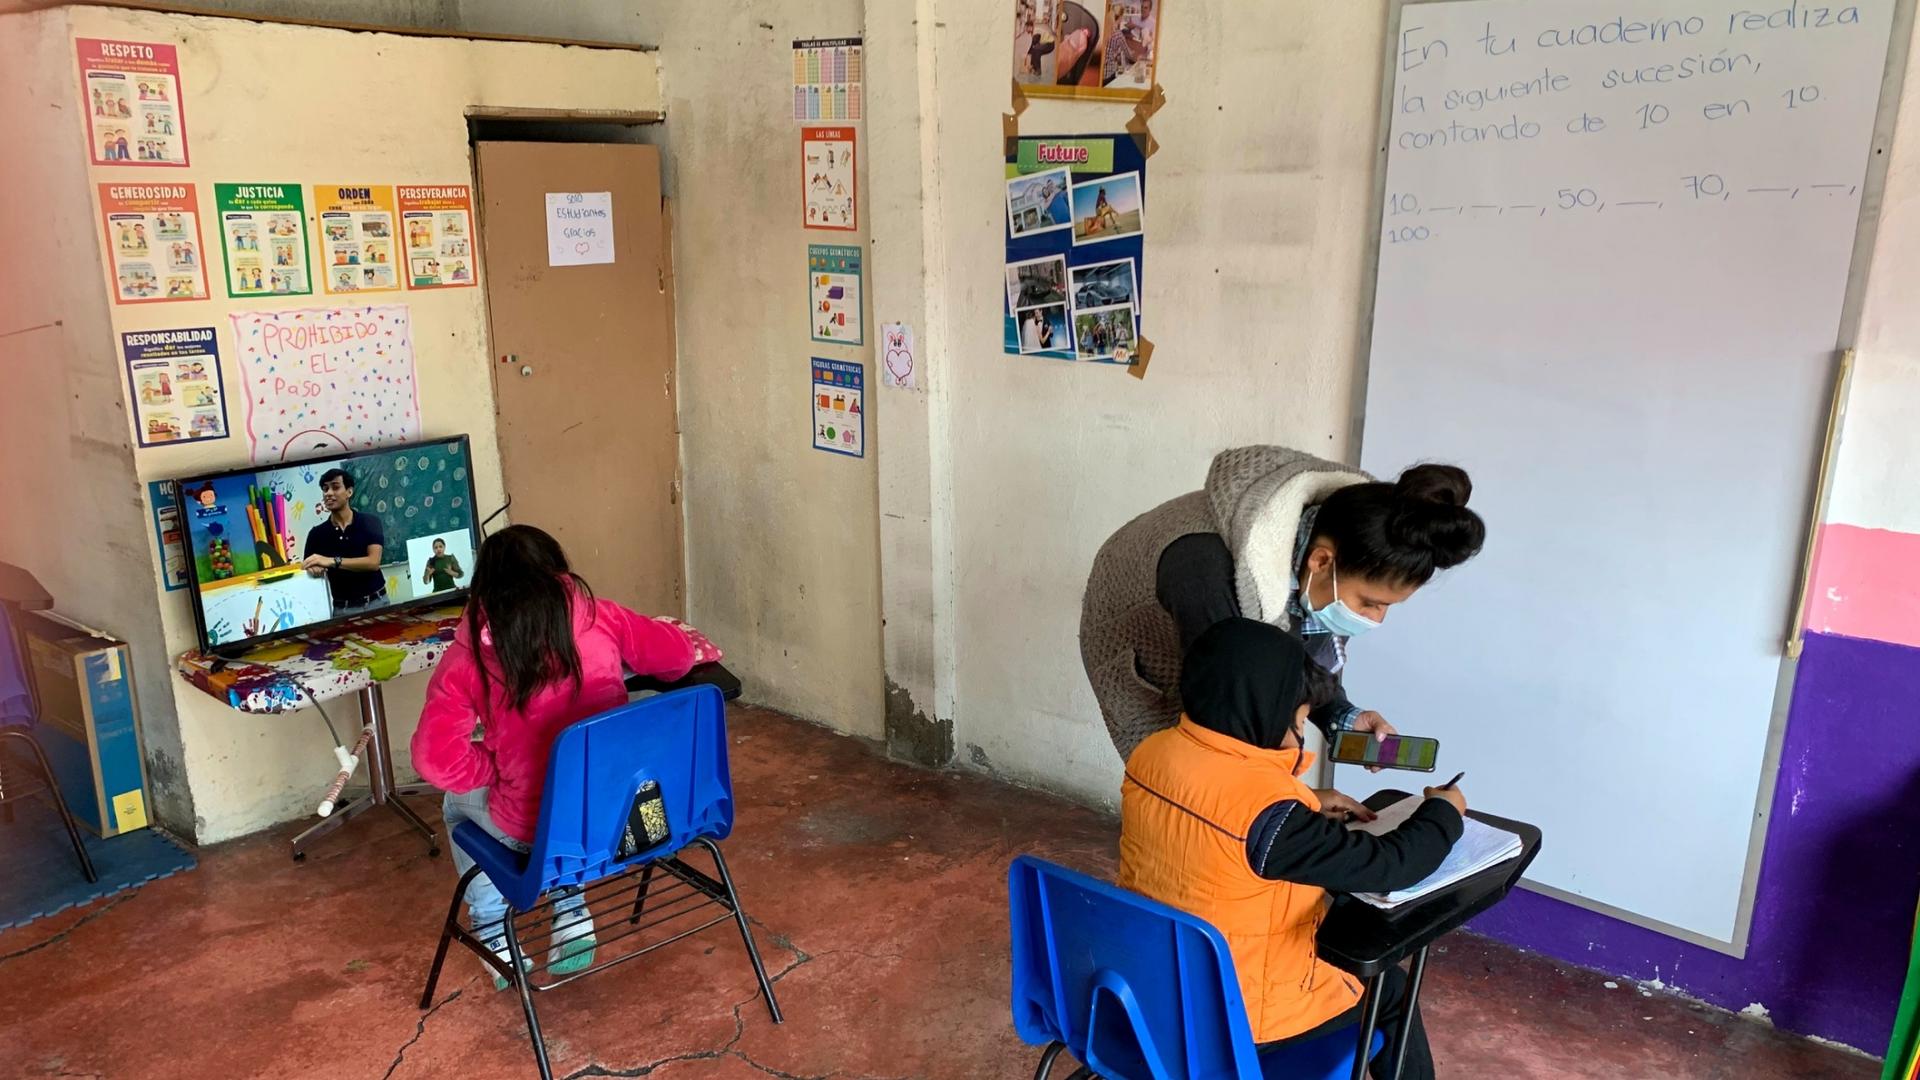 Dalia Davila, co-owner of La Abuela tortilla shop, helps Axel Carreño and Maria de la Luz Carreño at a space for students to use the internet and television for schooling.